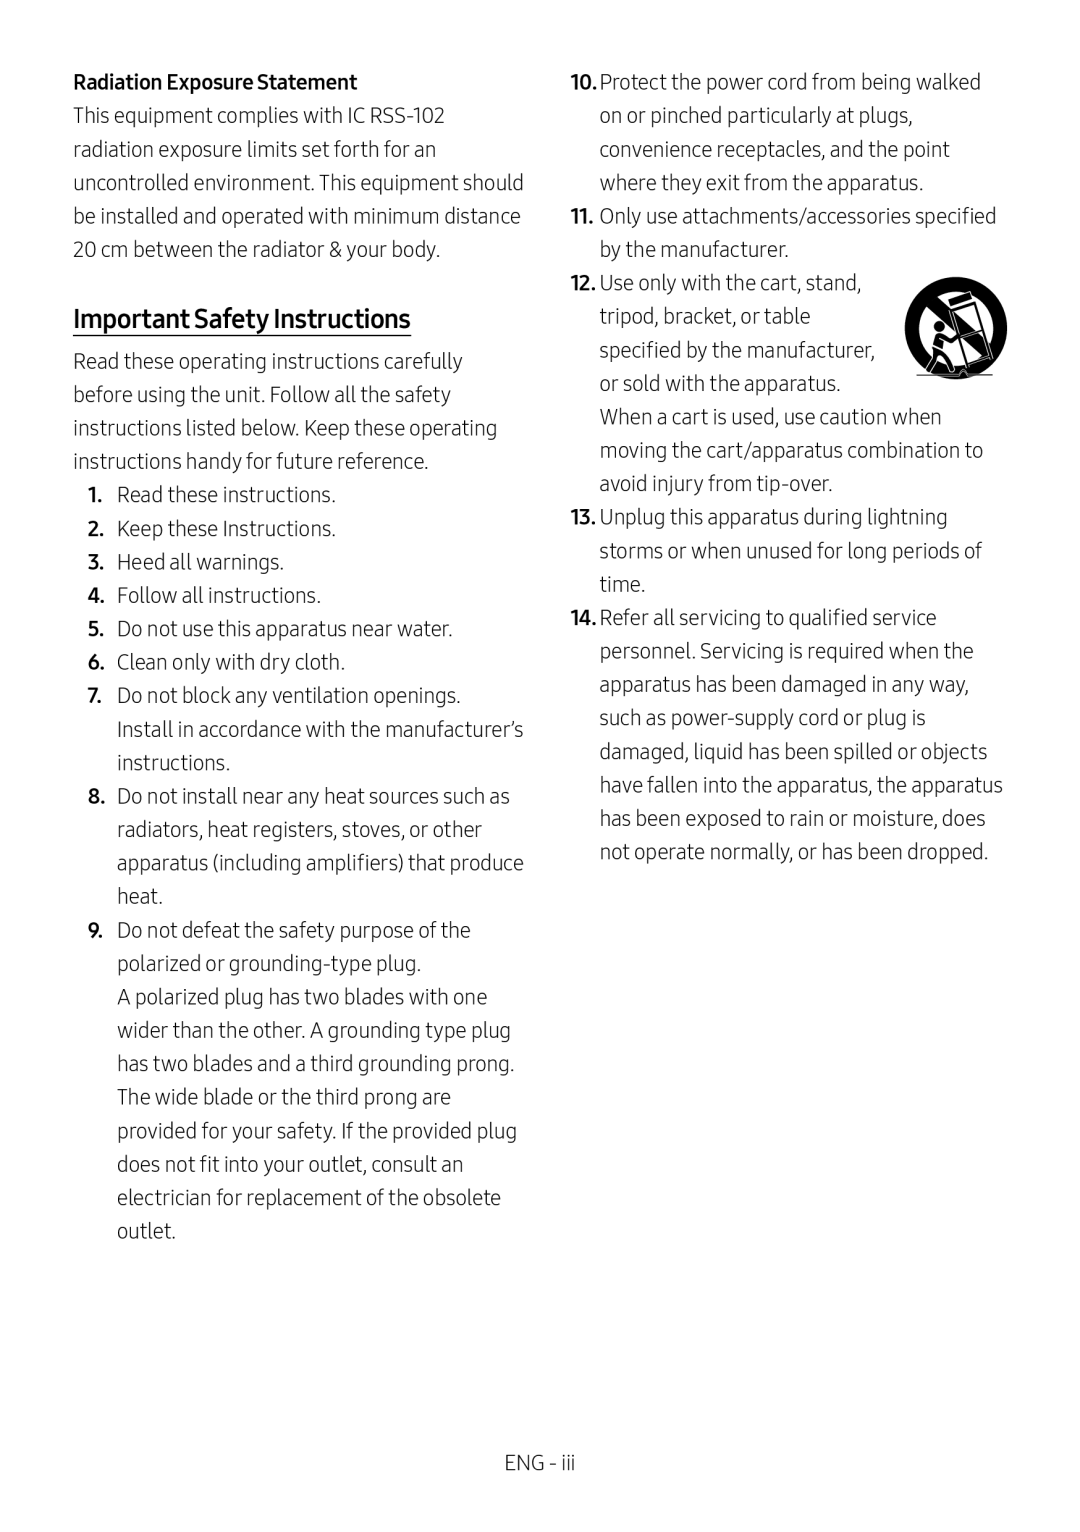 Important Safety Instructions Standard HW-R550